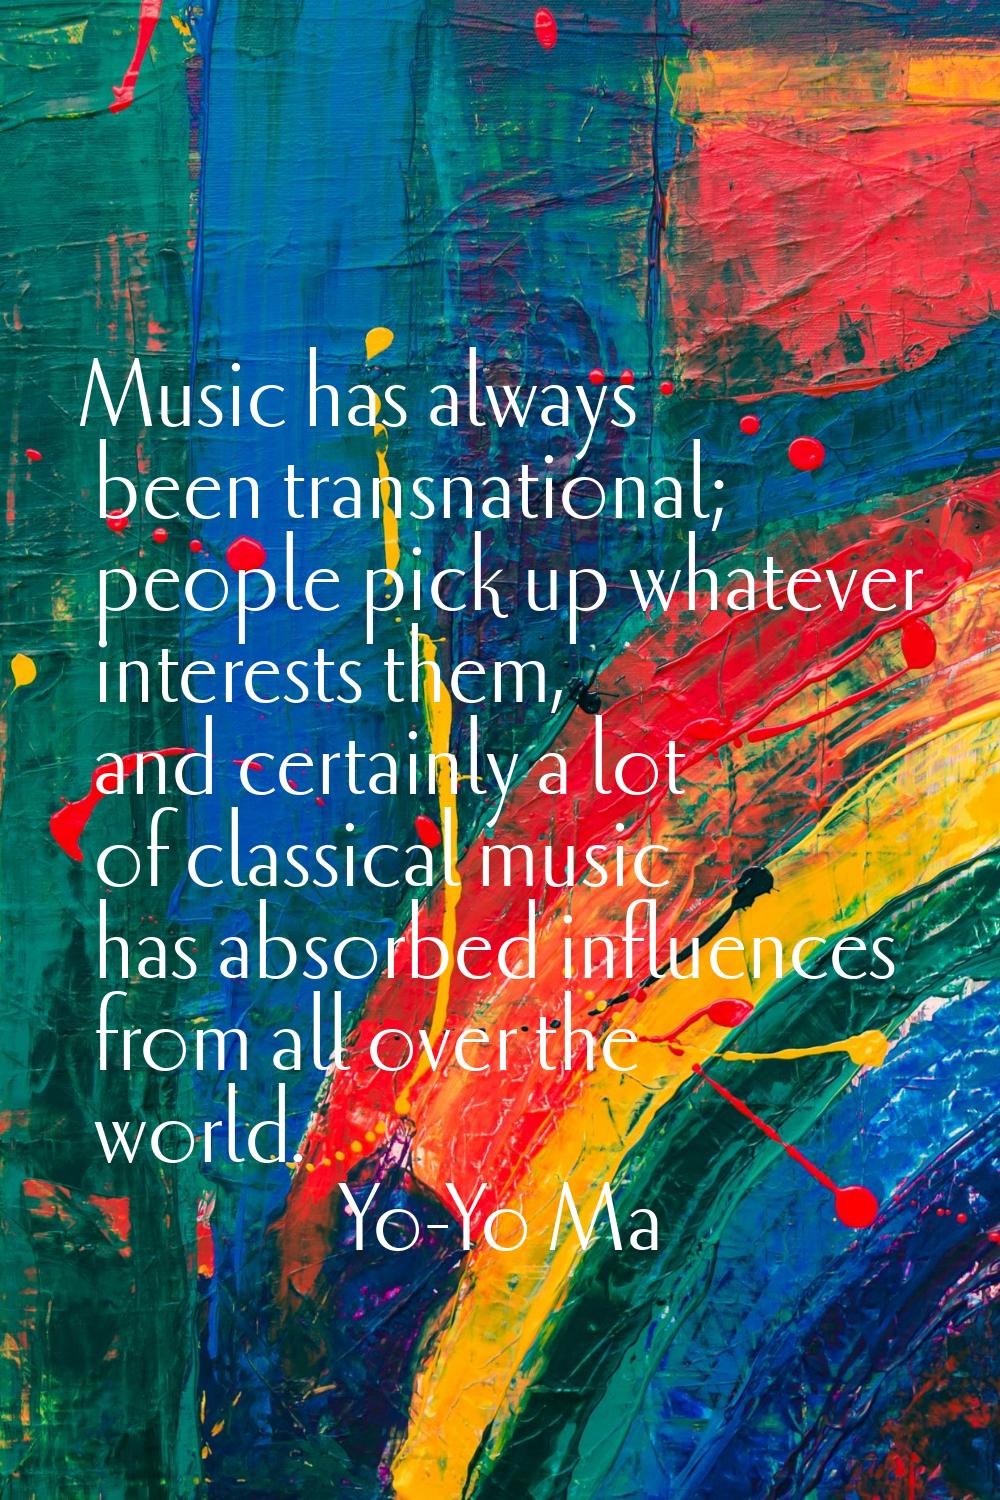 Music has always been transnational; people pick up whatever interests them, and certainly a lot of